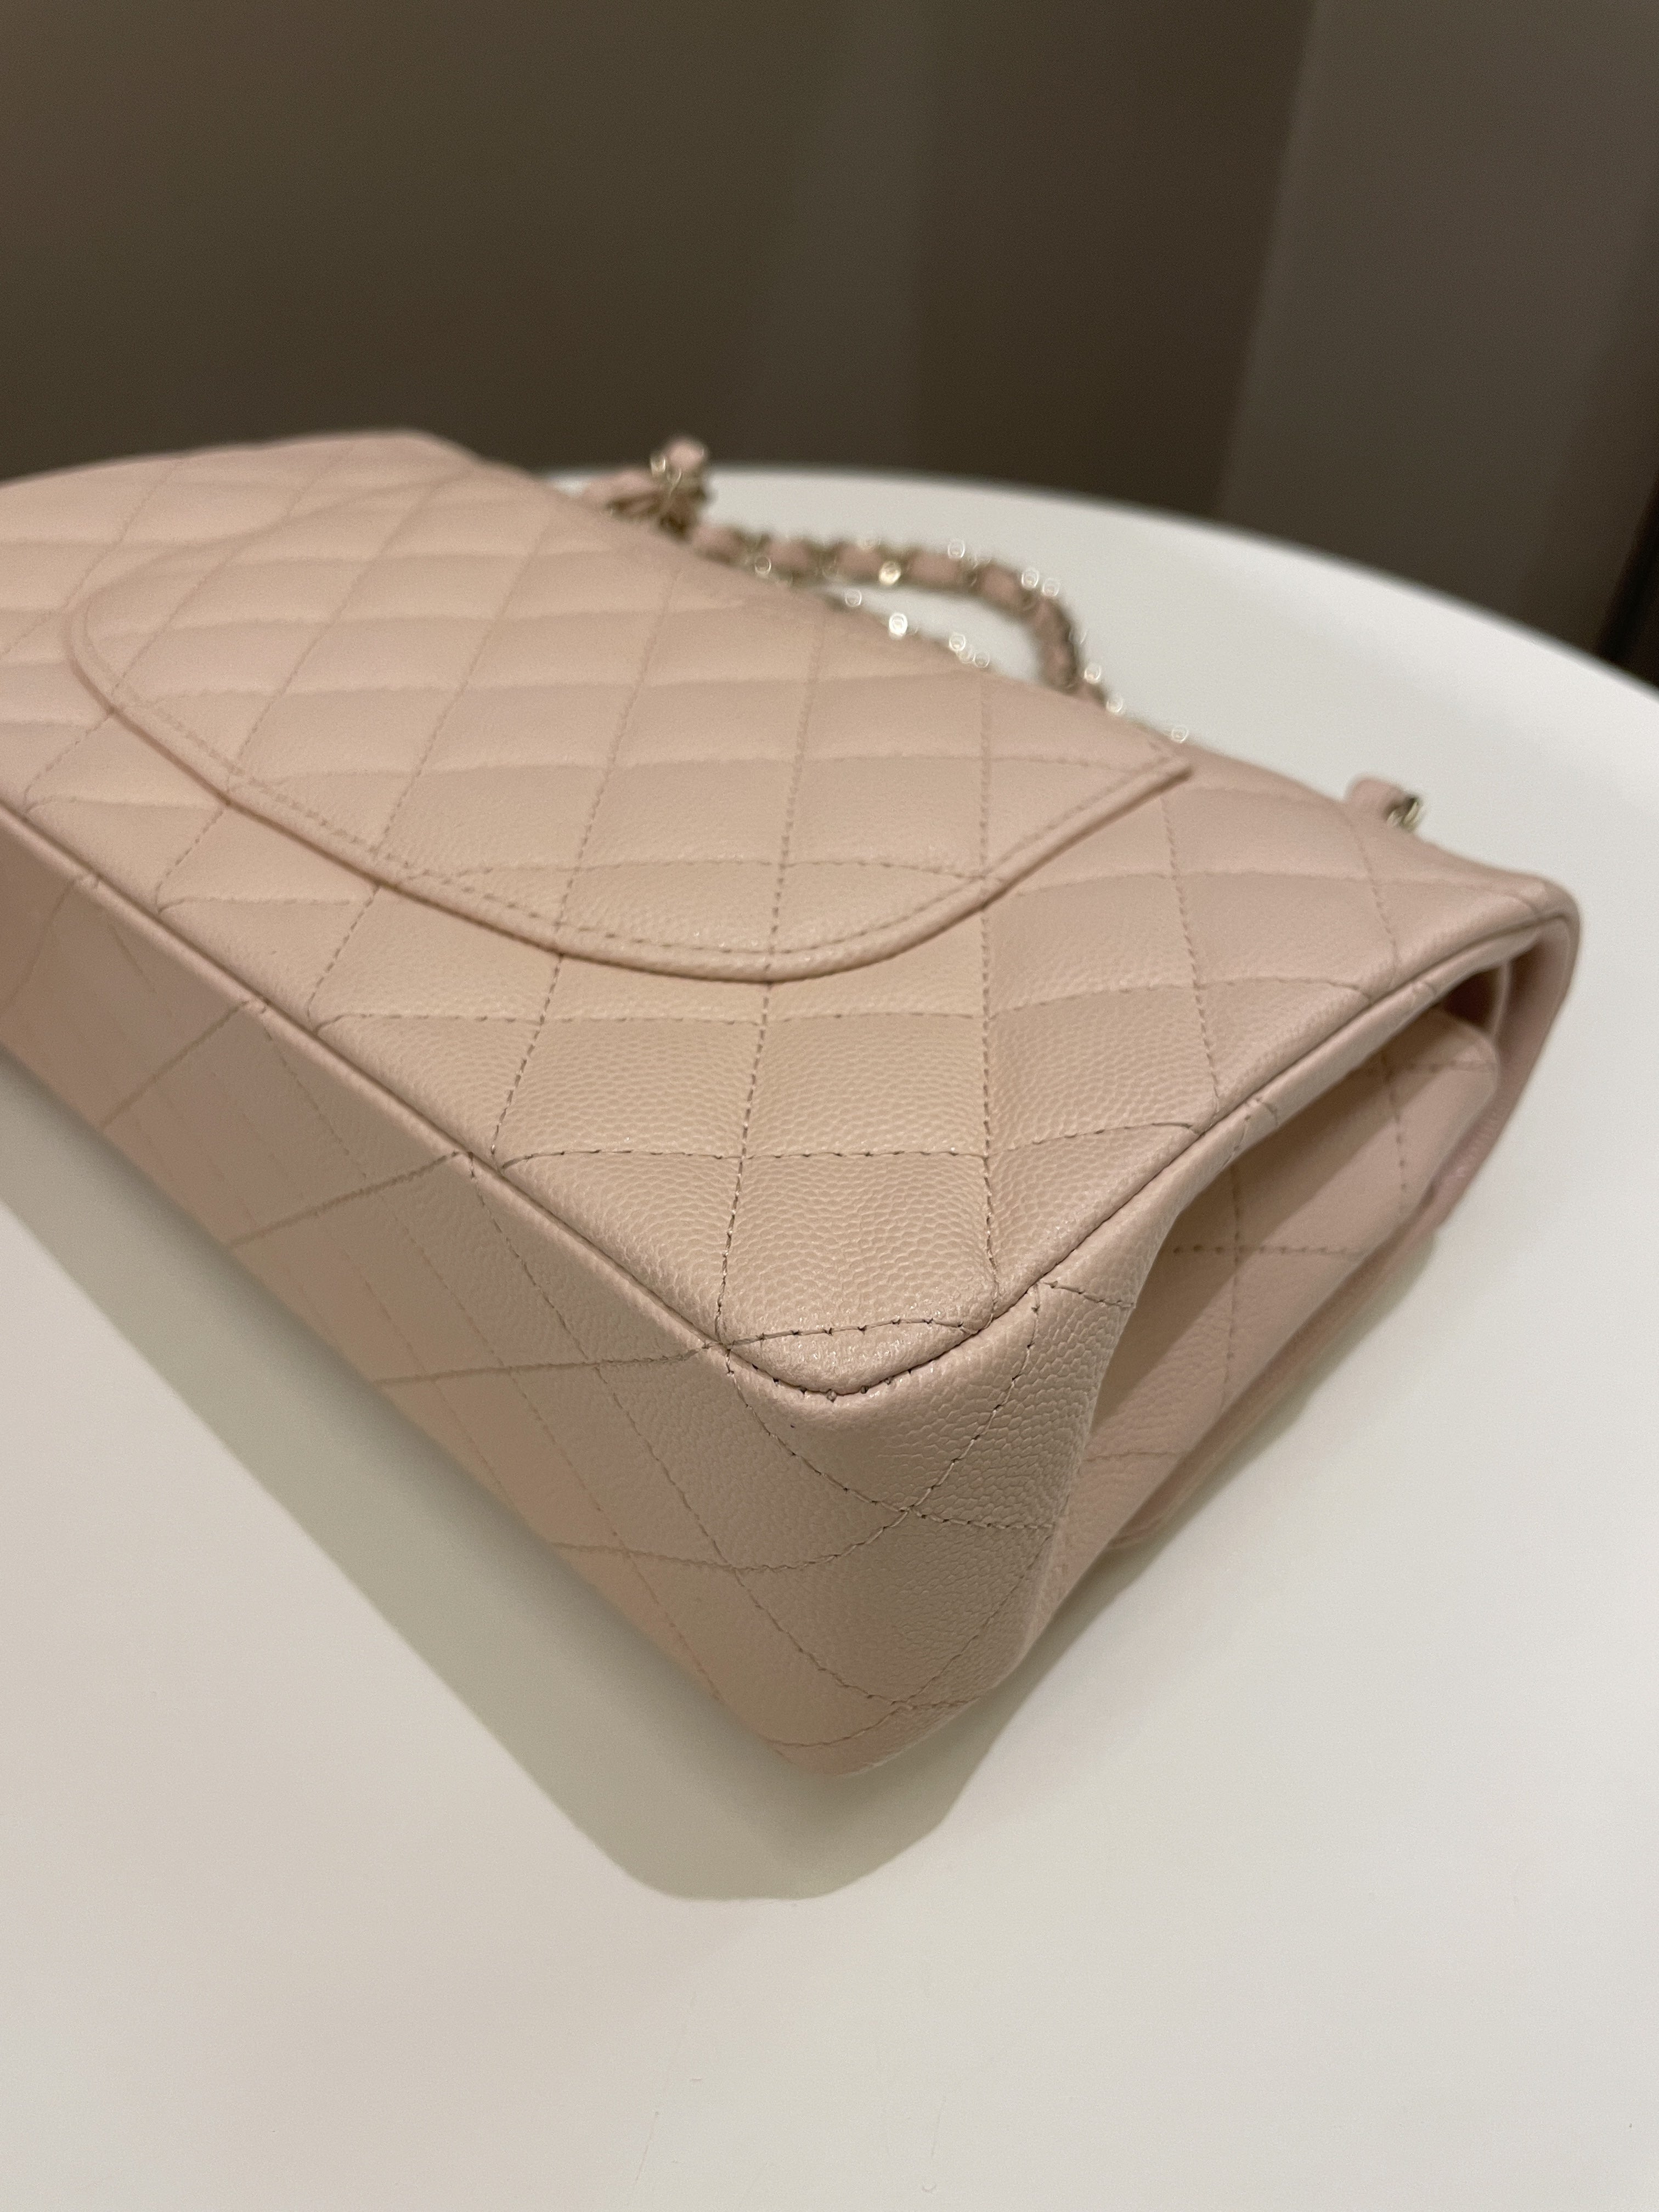 Chanel Classic Quilted Medium Double Flap Beige Caviar